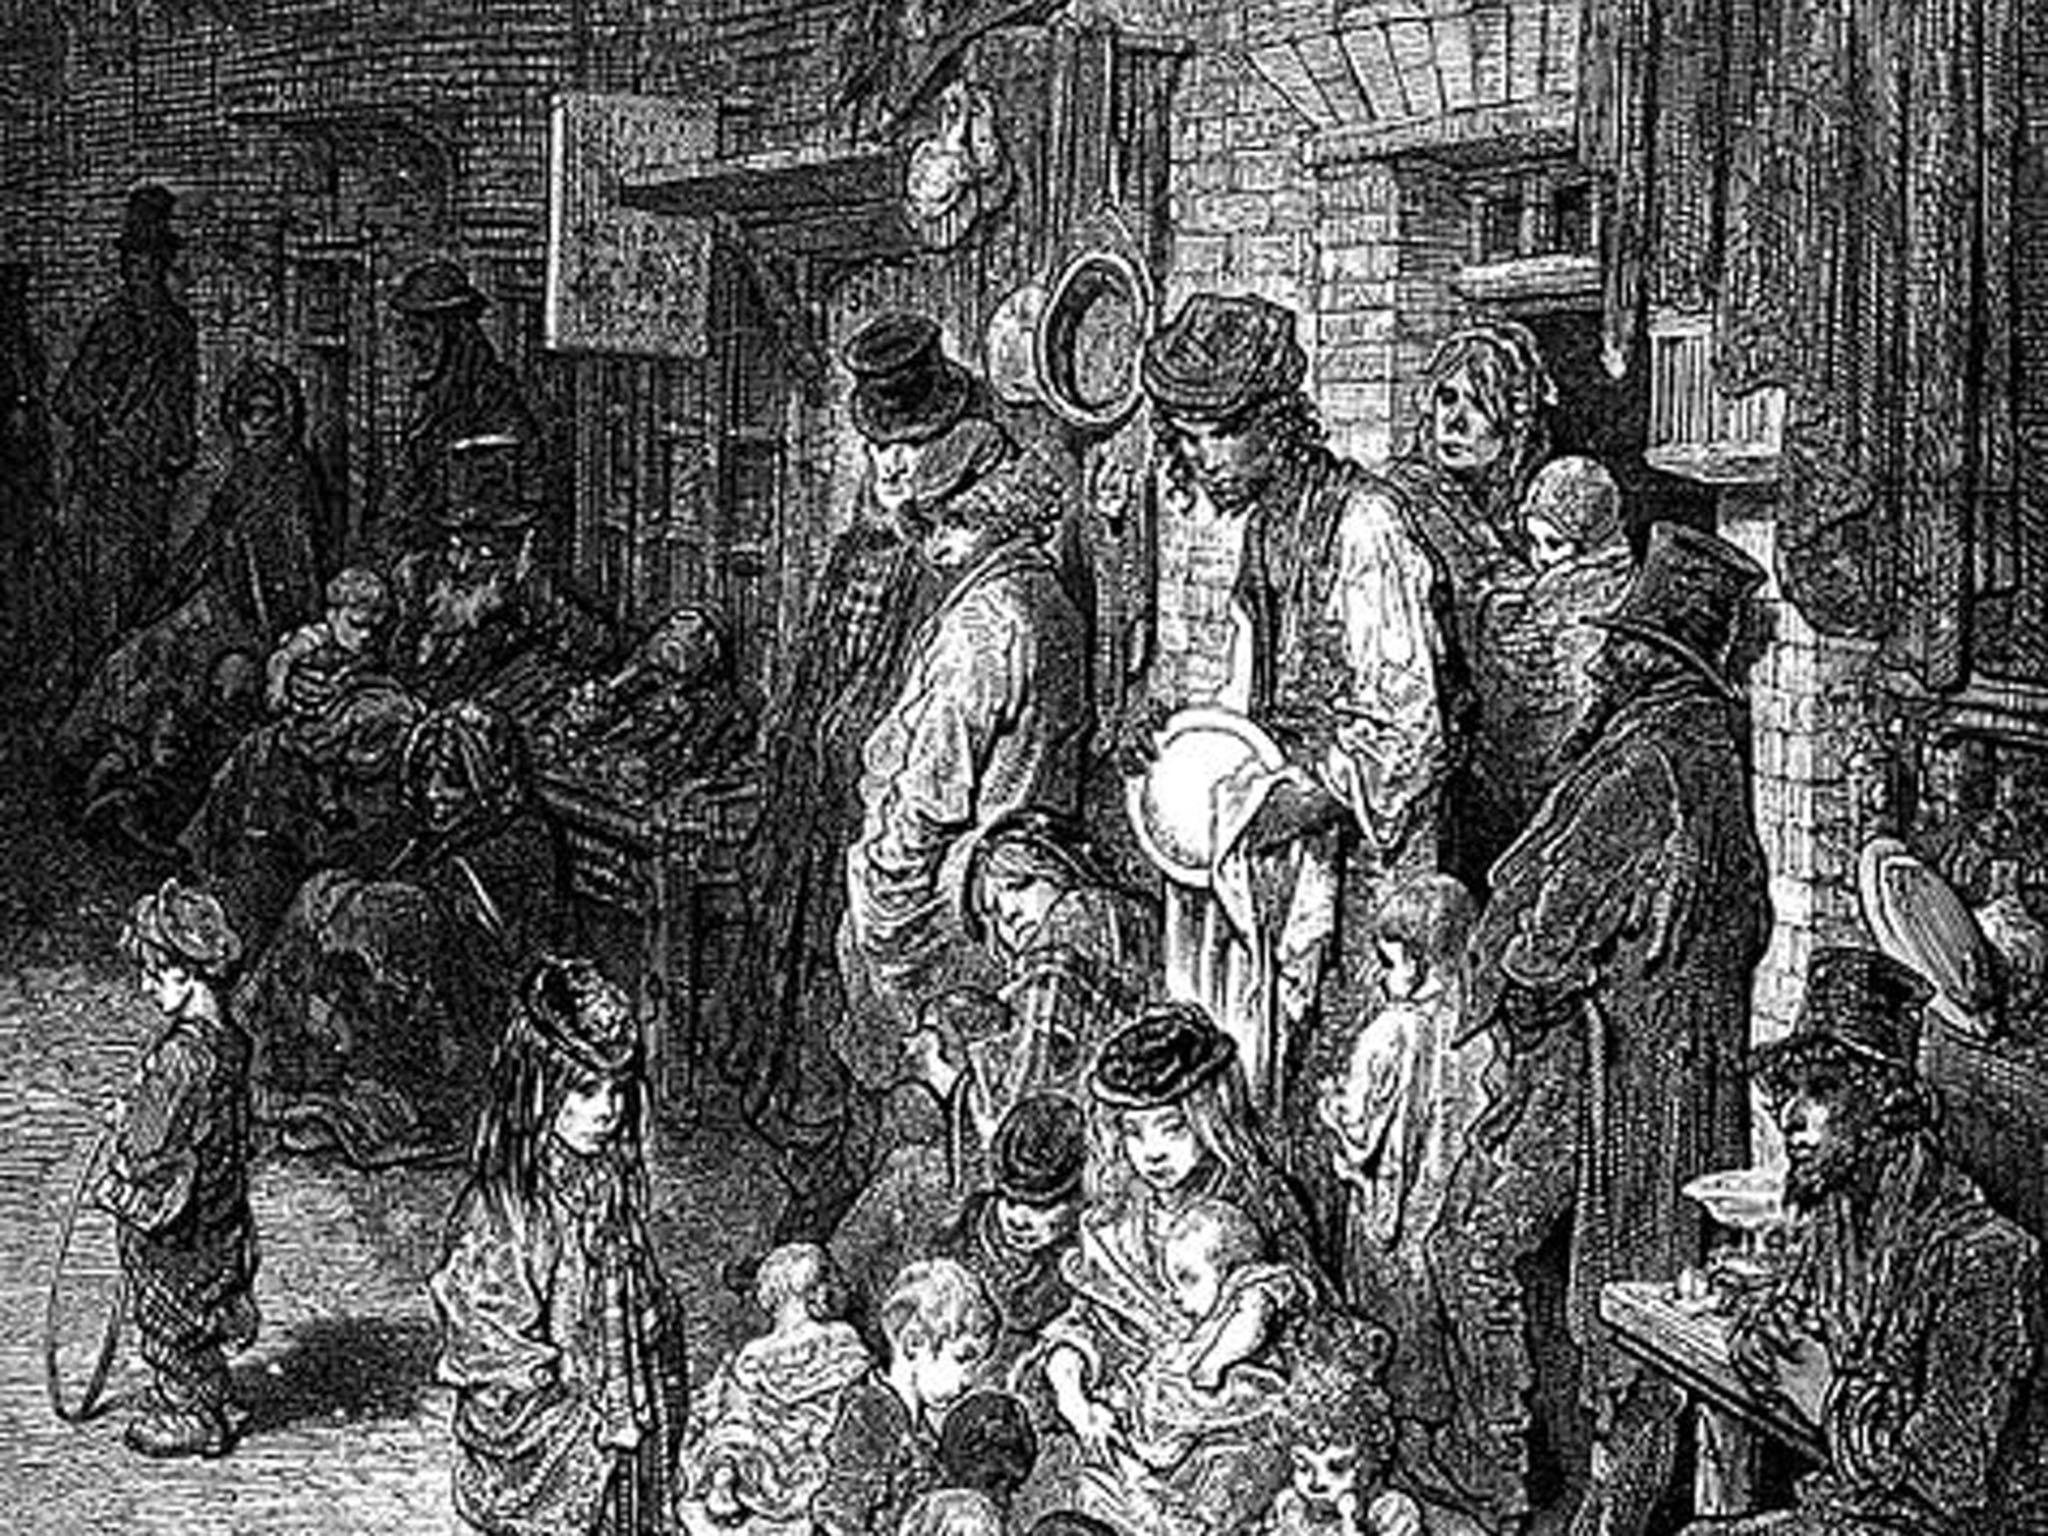 During the industrial revolution, British cities became overpopulated and living standards were poor (Creative Commons)